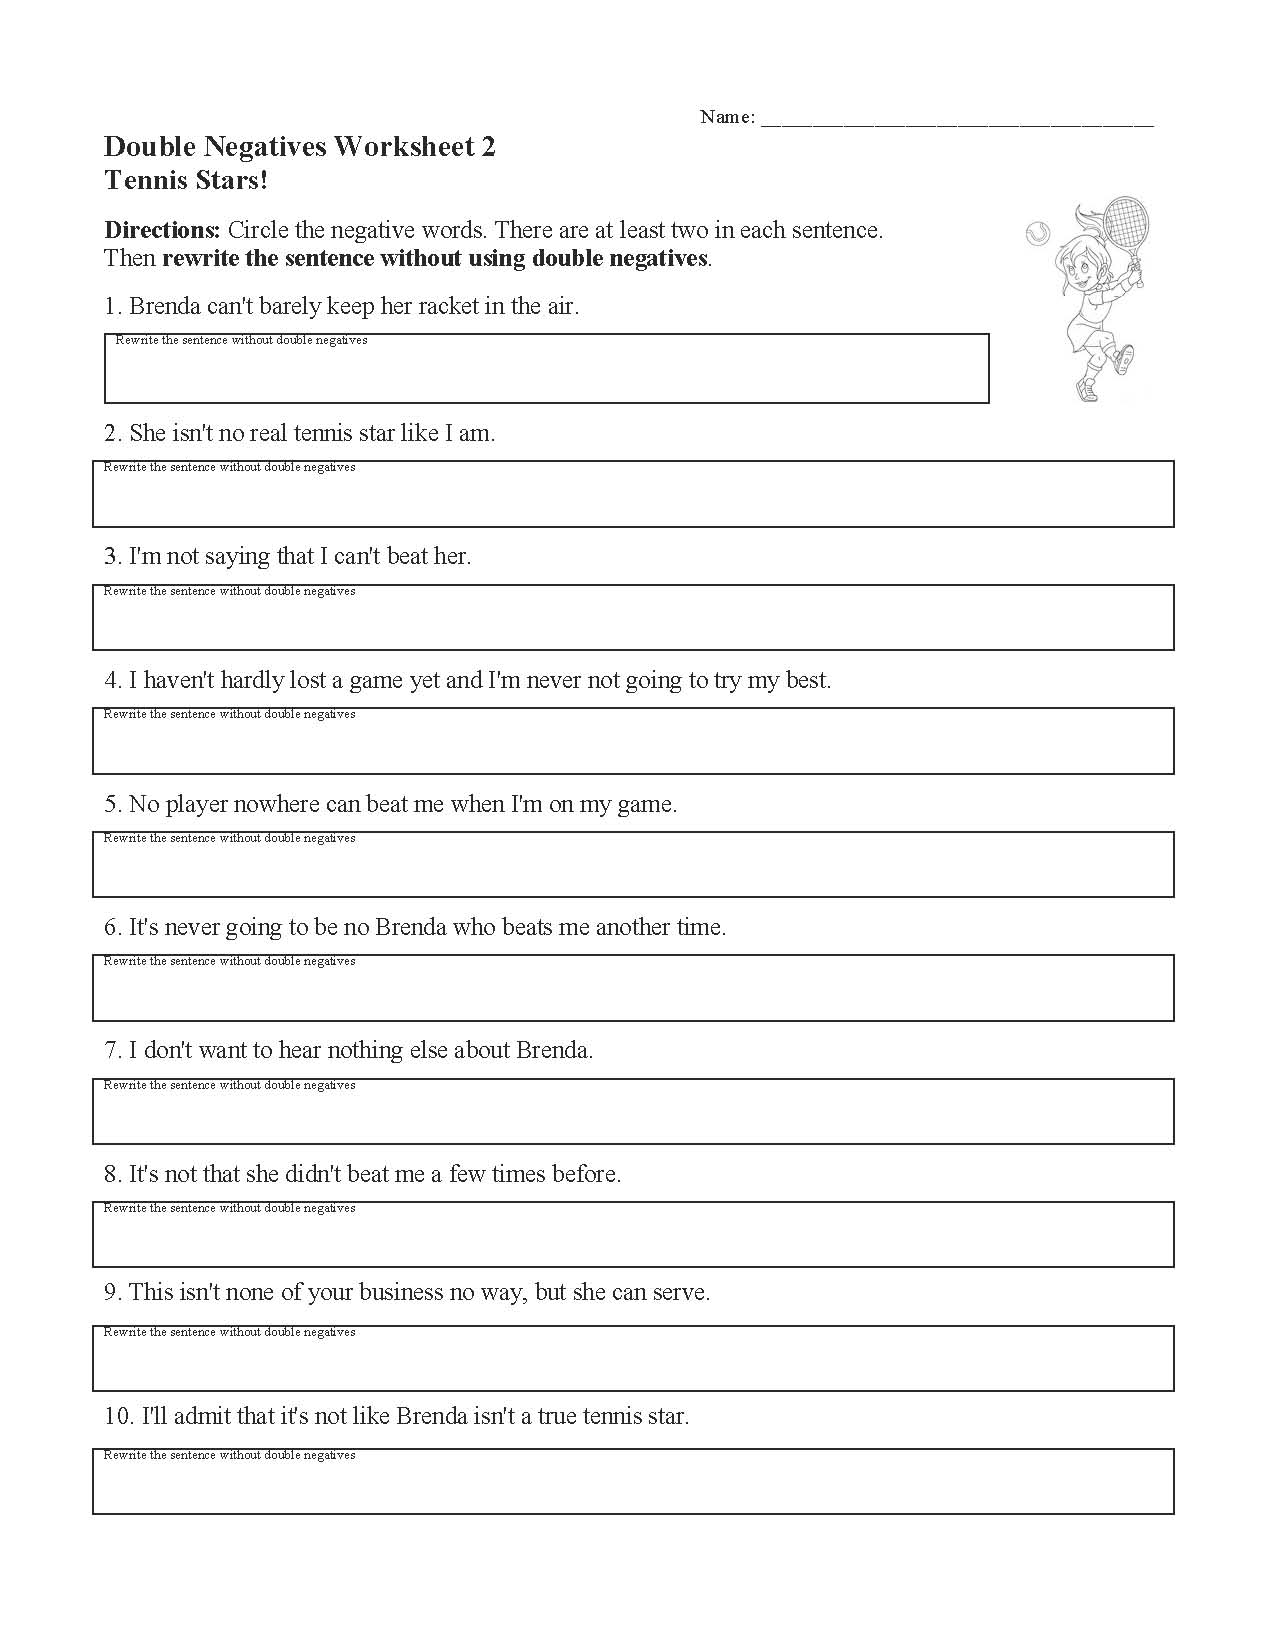 This is a preview image of Double Negatives Worksheet 2. Click on it to enlarge it or view the source file.